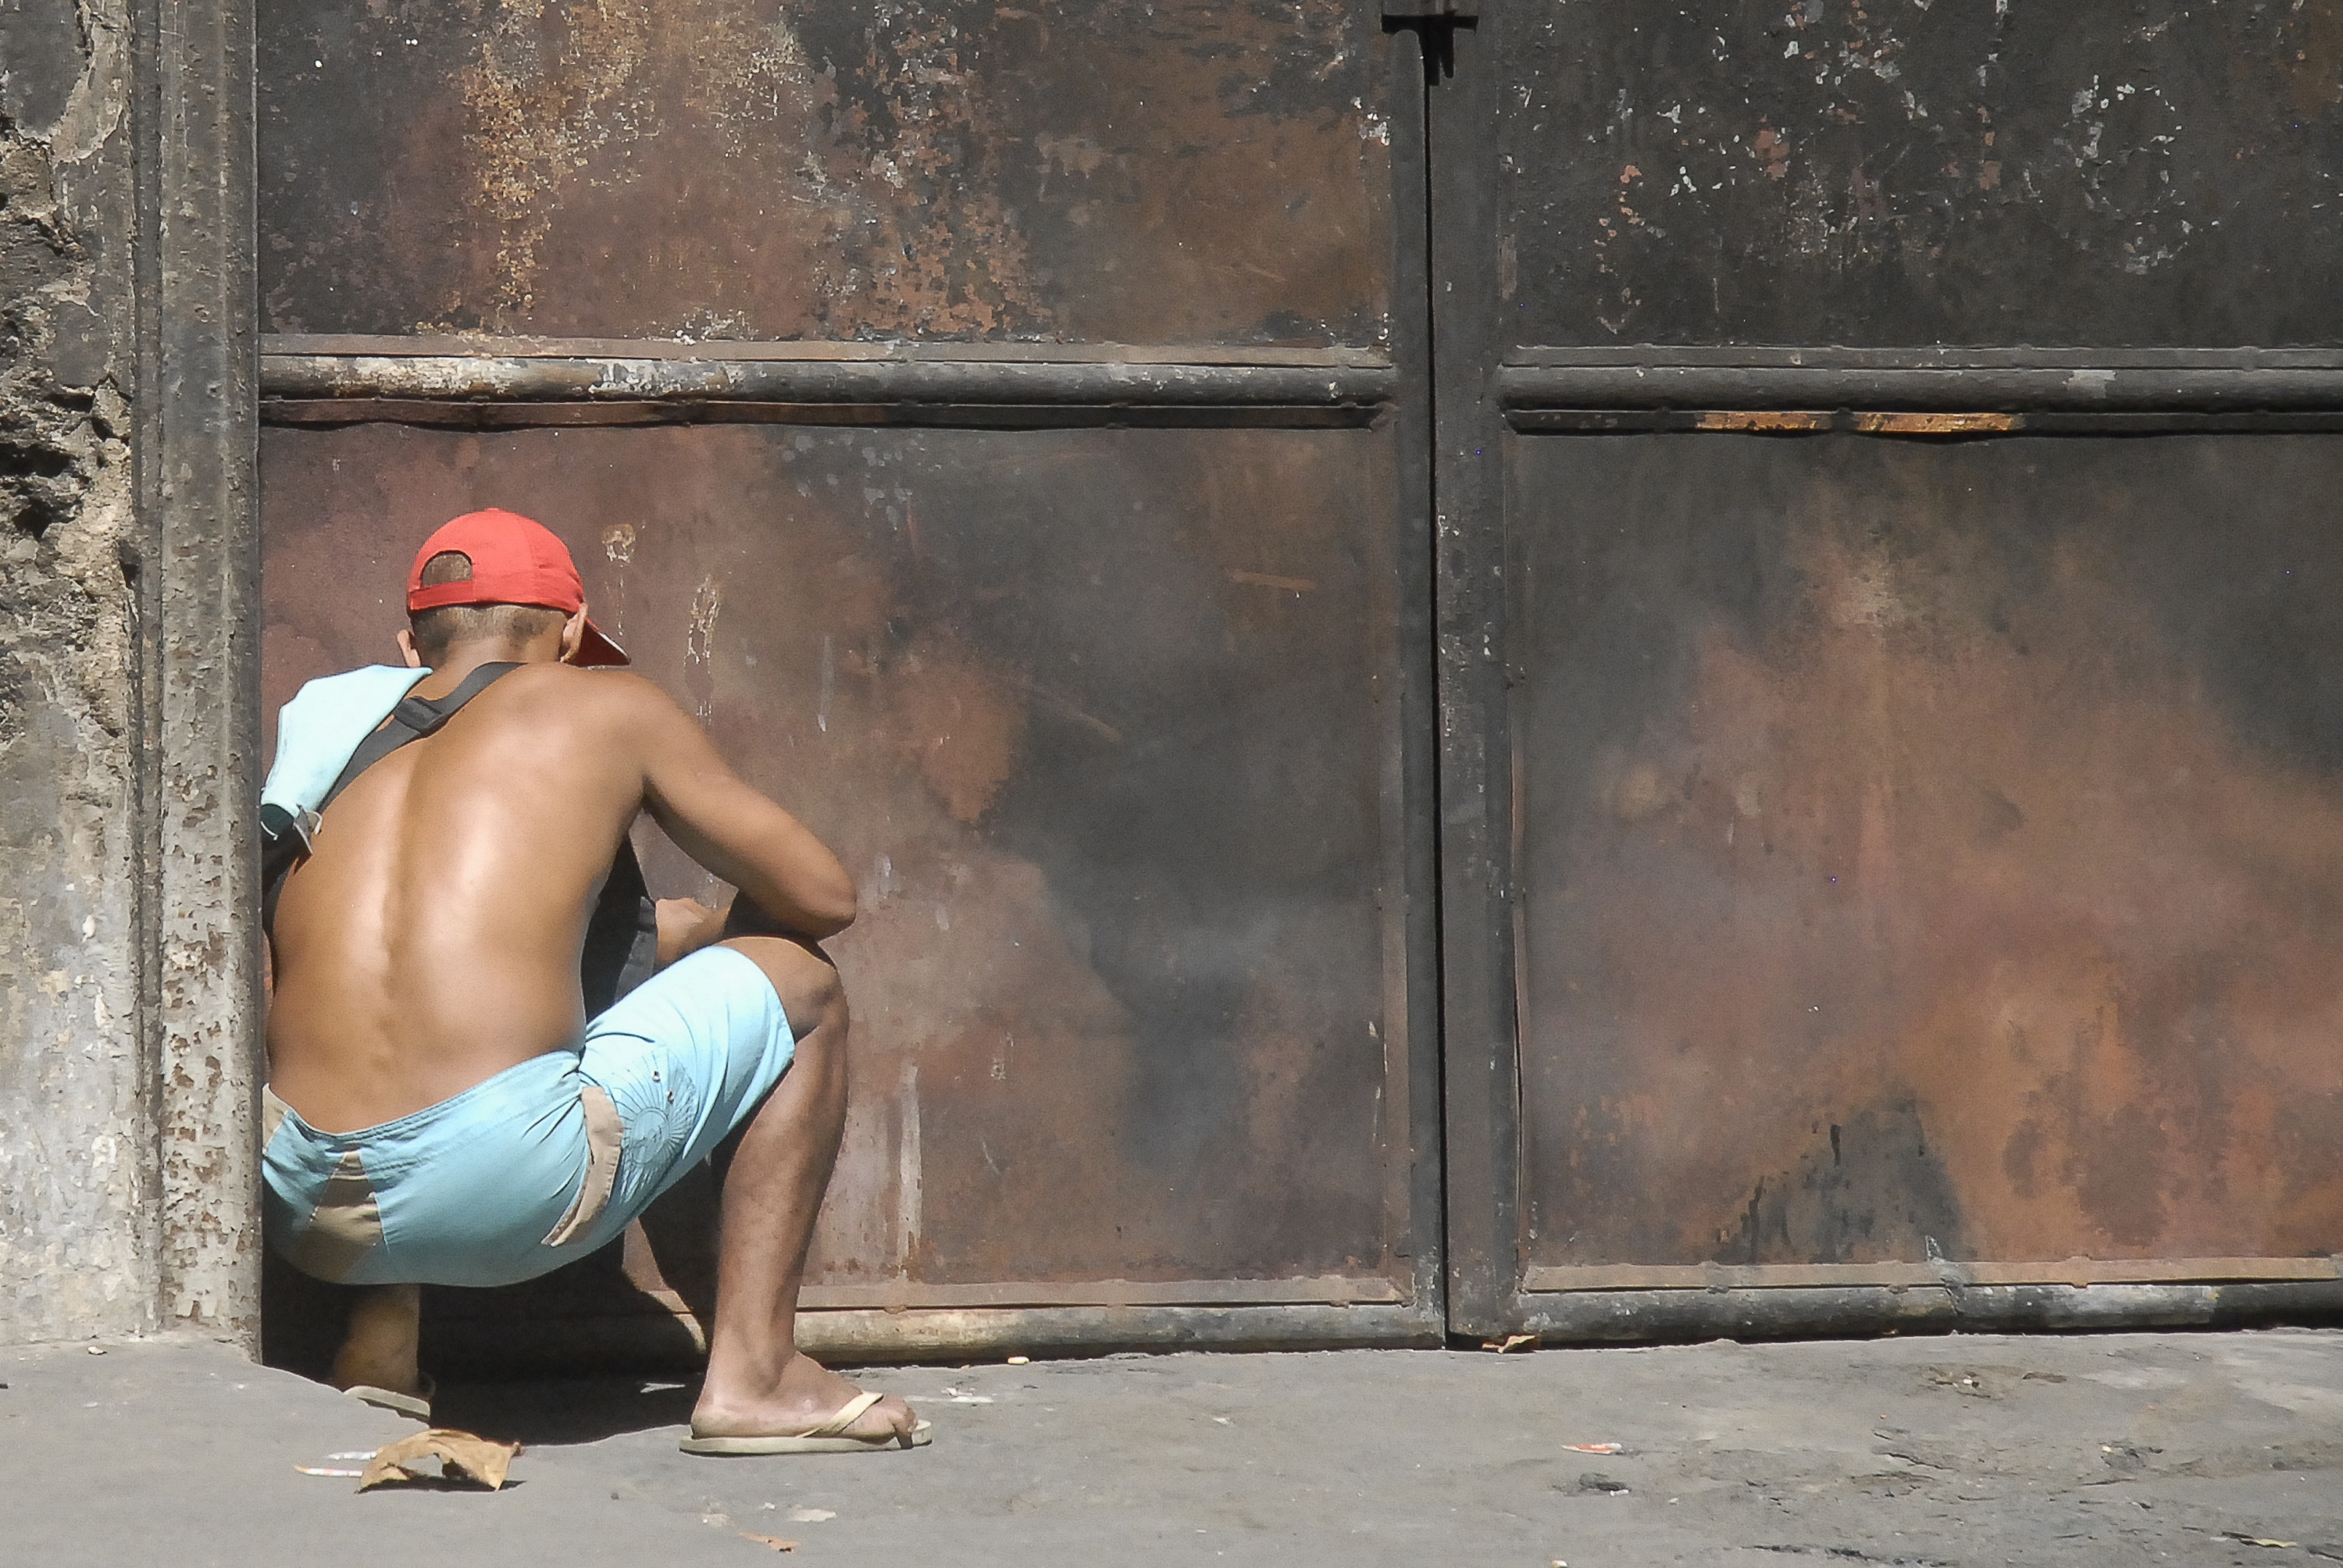 Report Shows Eighty Percent of Crack Users in Rio are Male